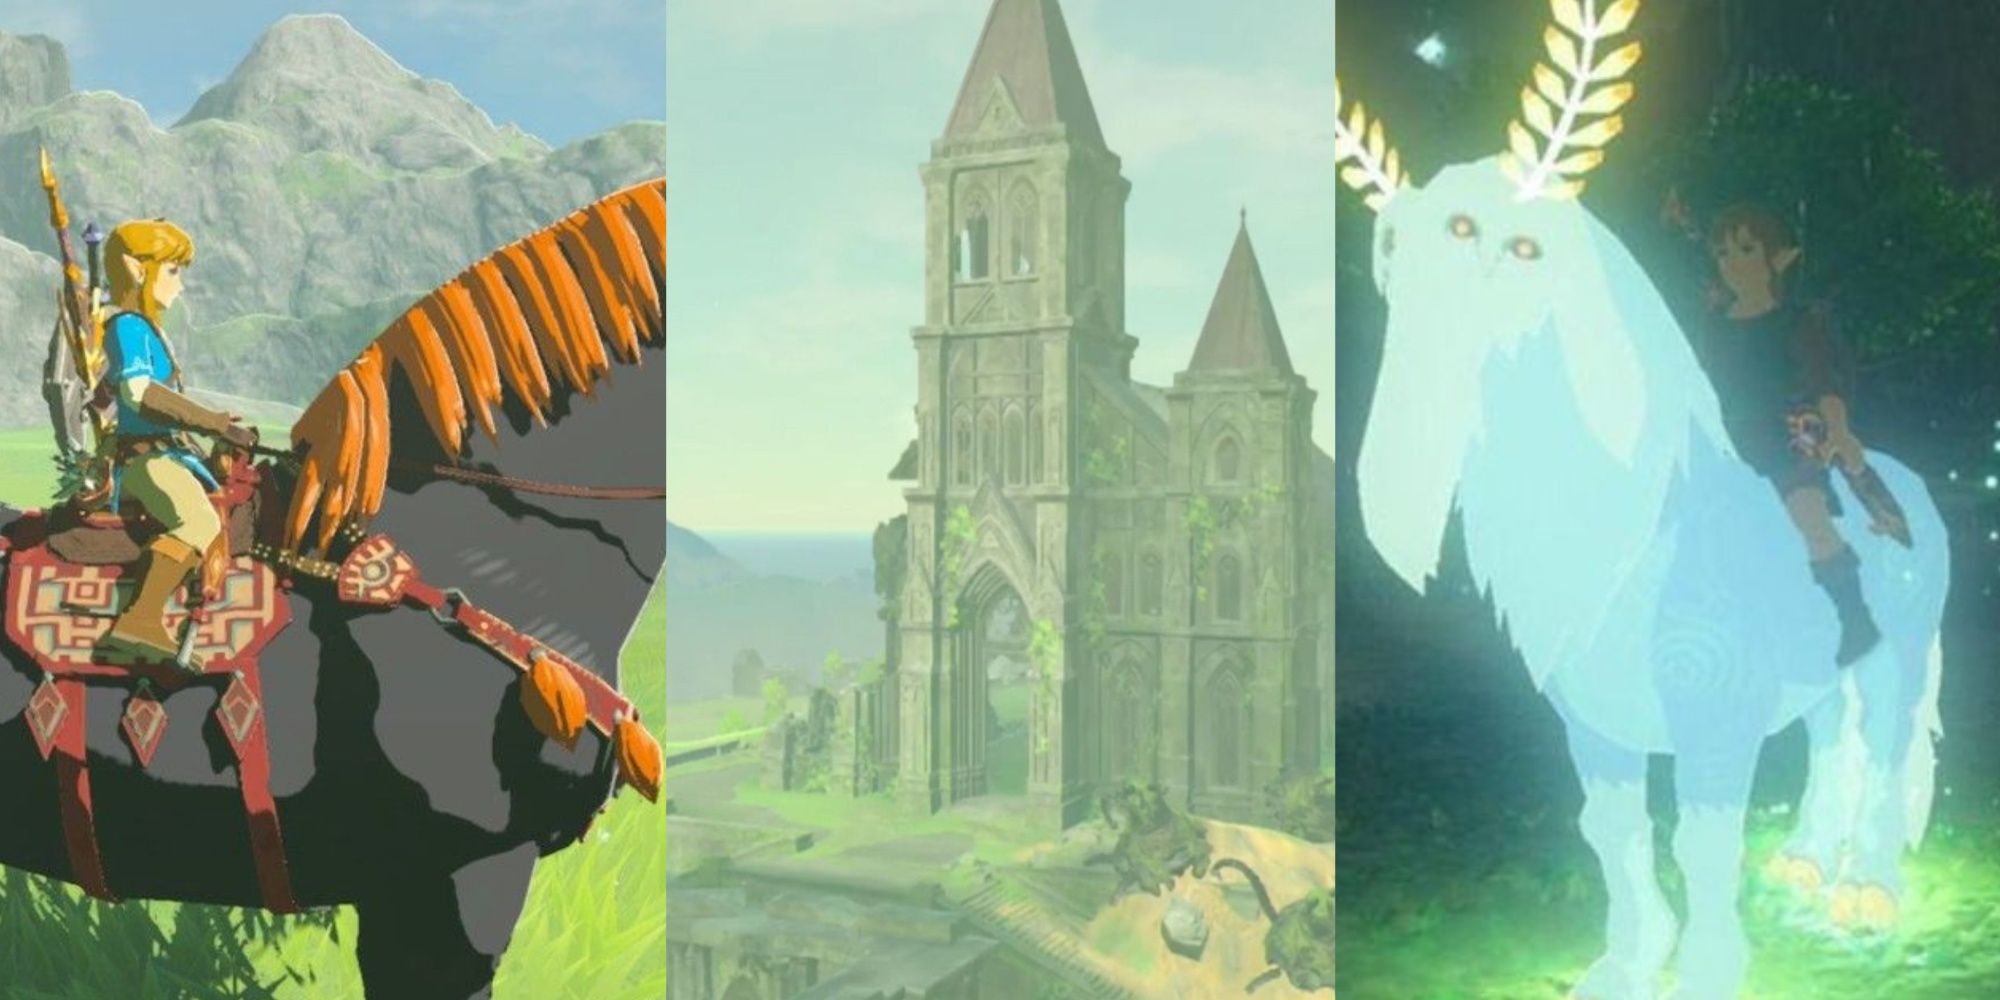 Split image screenshots of Link riding Ganon's horse, the Temple of Time, and Link riding the Lord of the Mountain in BOTW